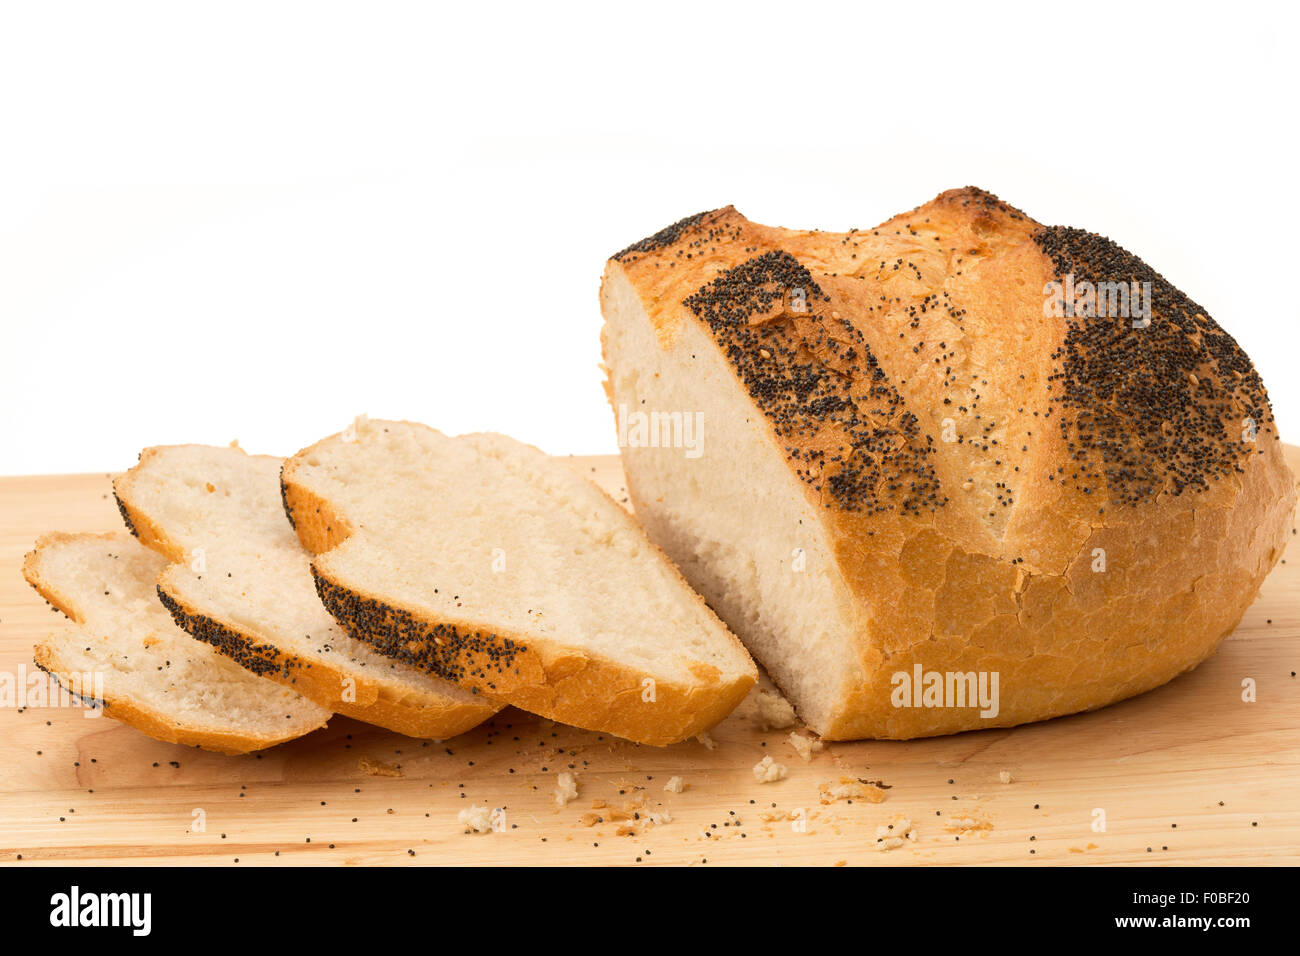 Fresh baked loaf of bread with slices on a wooden cutting board - white background Stock Photo